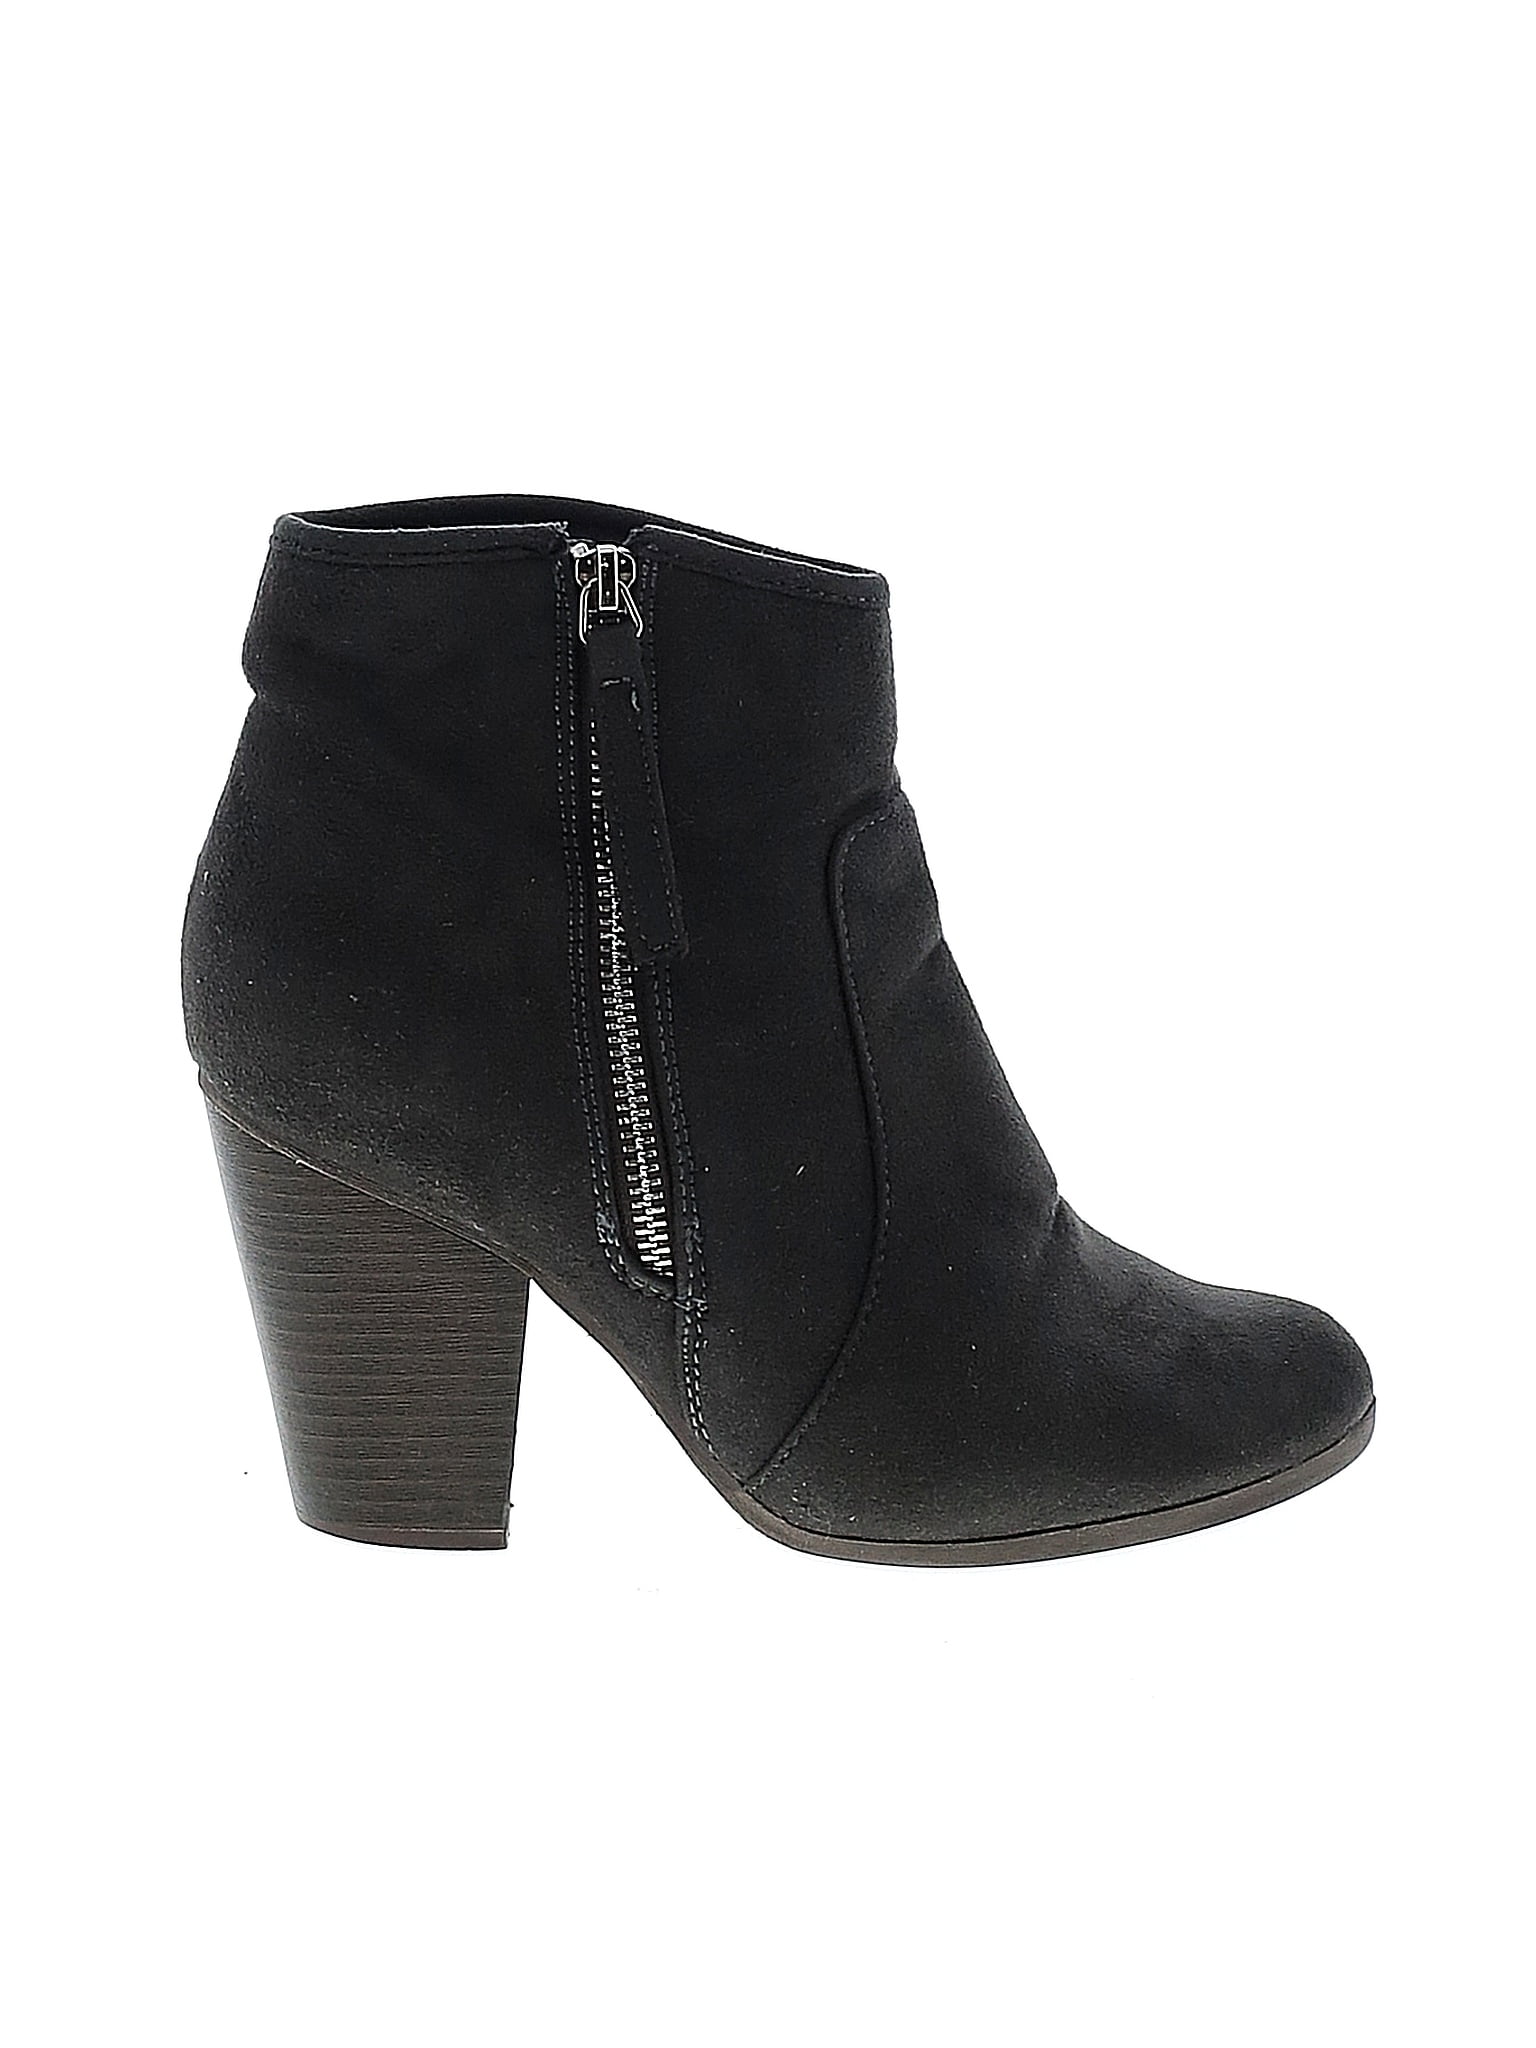 Journee Collection Solid Black Gray Ankle Boots Size 7 - 36% off | thredUP